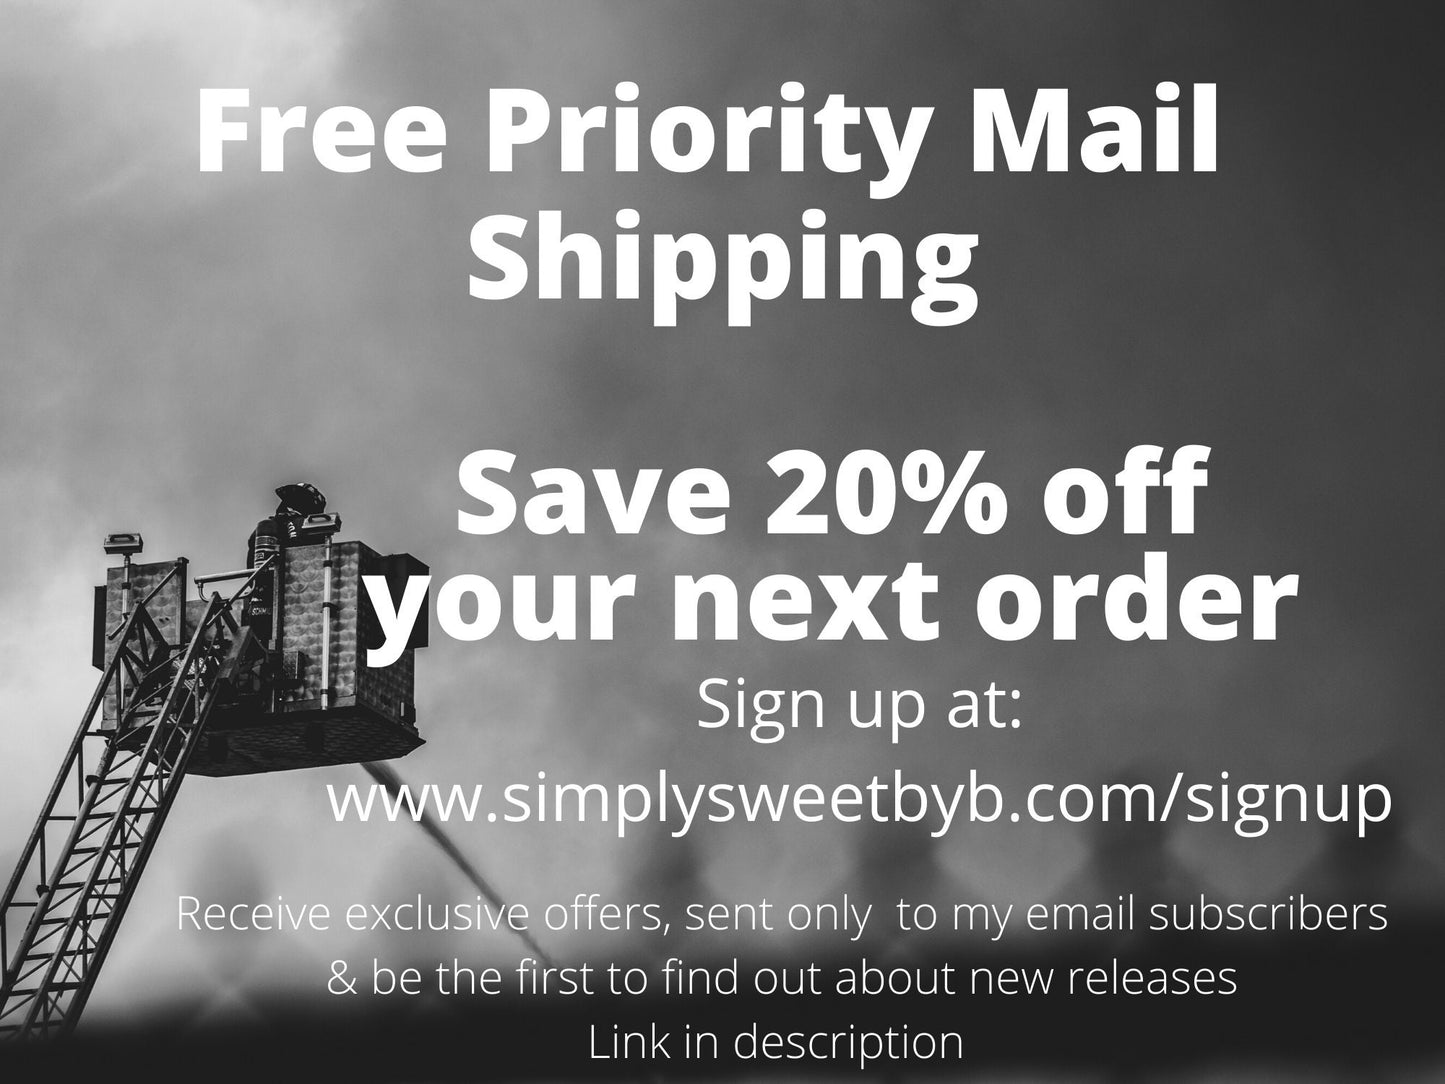 sign up for email to receive 20% off. www.simplysweetbyb.com